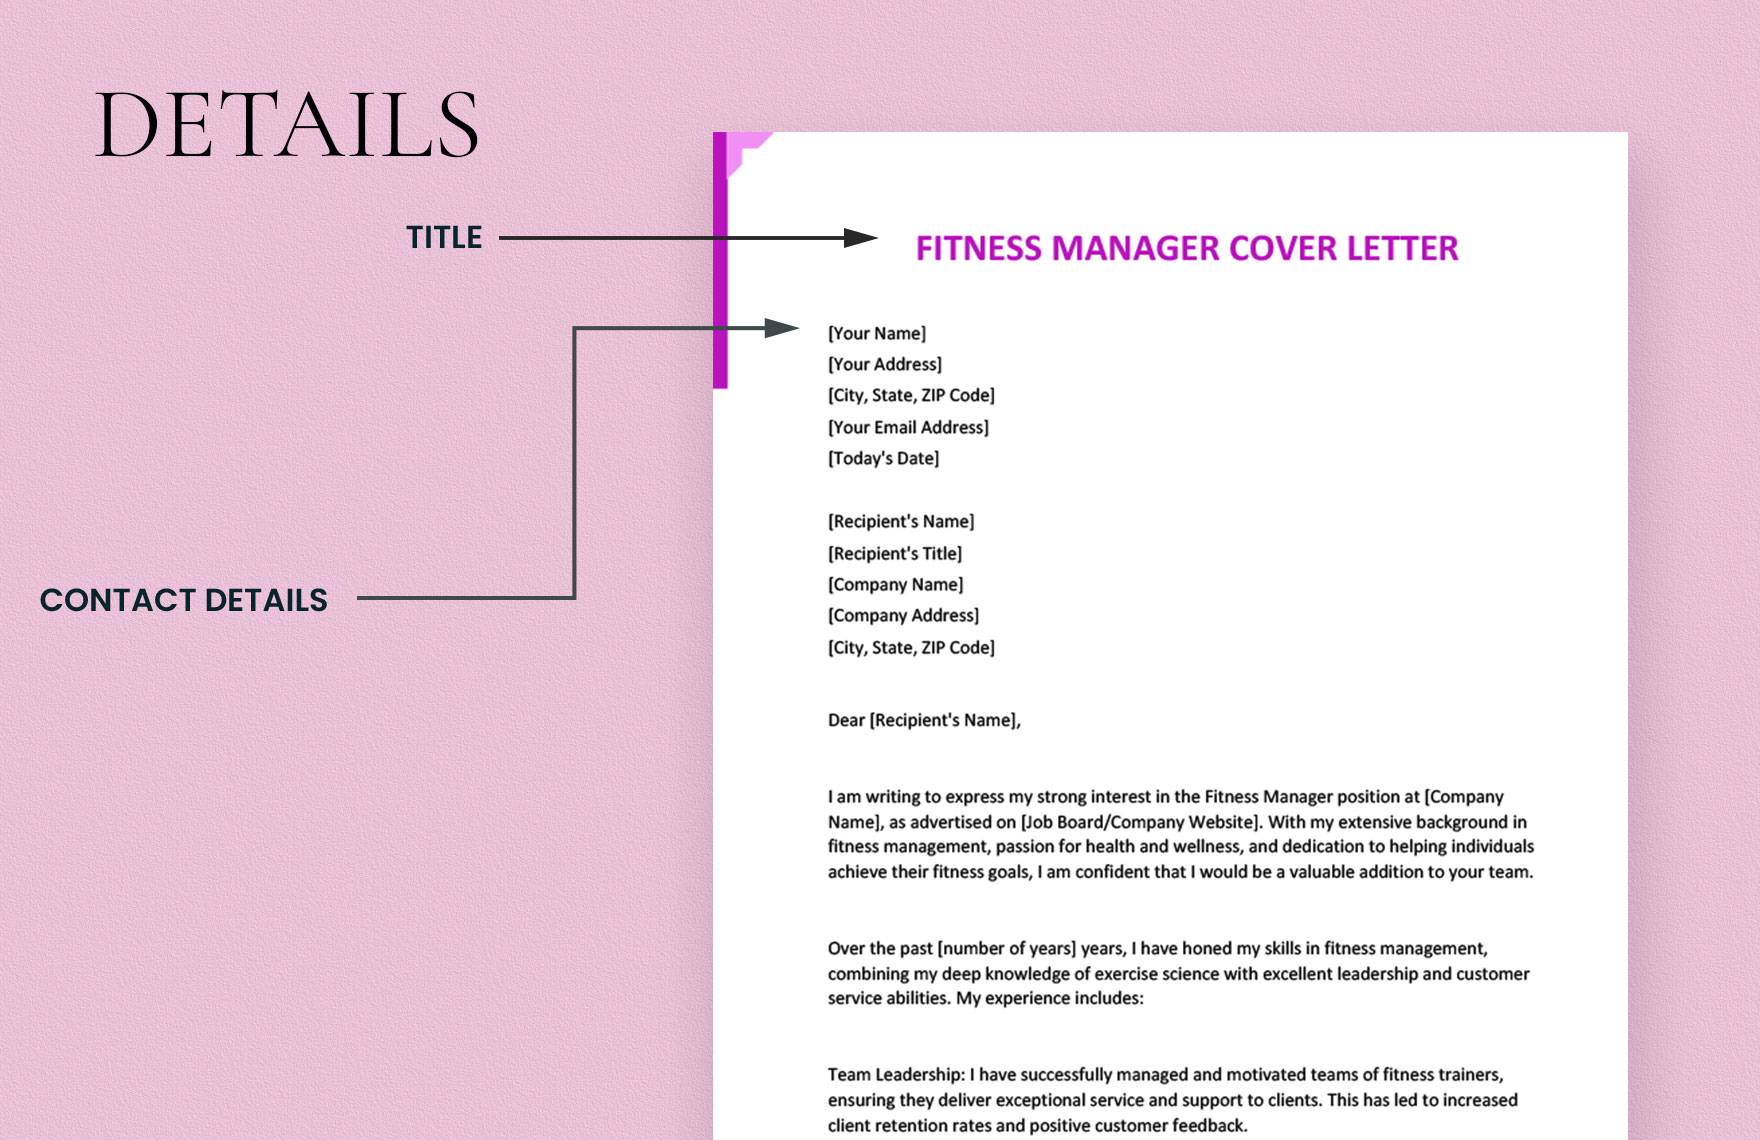 Fitness Manager Cover Letter